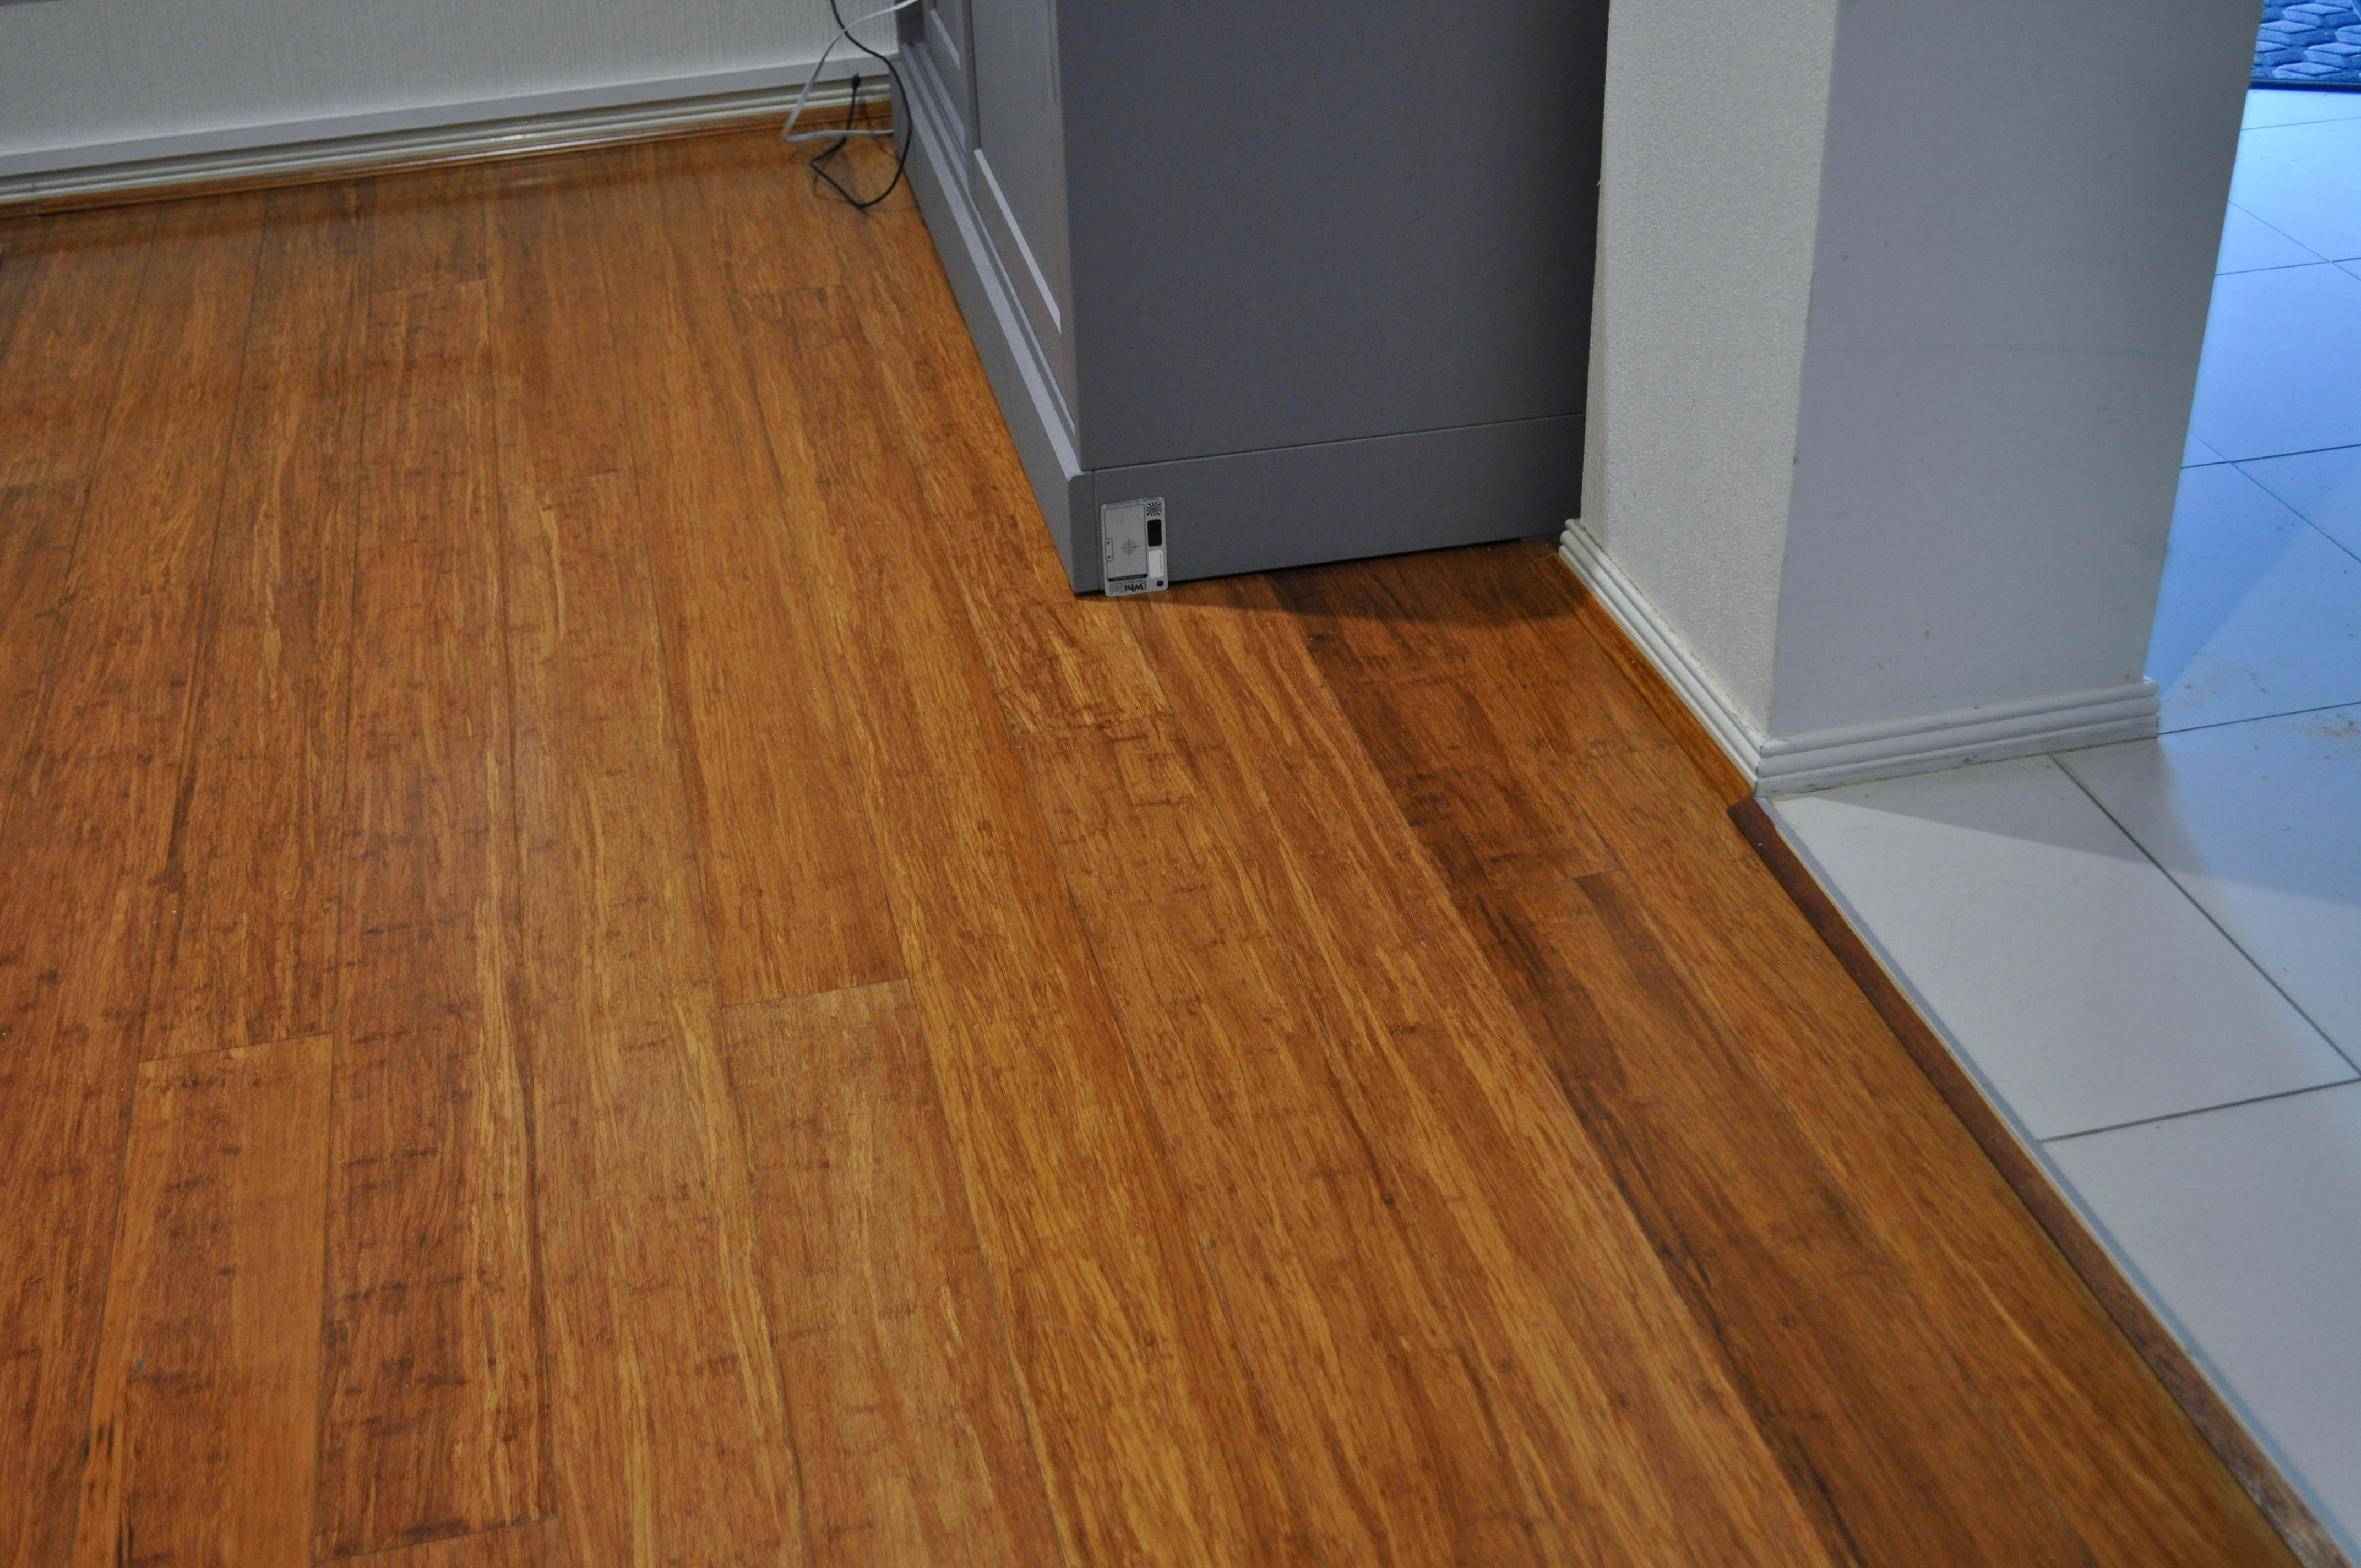 showing a room with a newly laid bamboo floor in ahouse in the suburb of Caroline Springs. The floor is an orangey brown color 